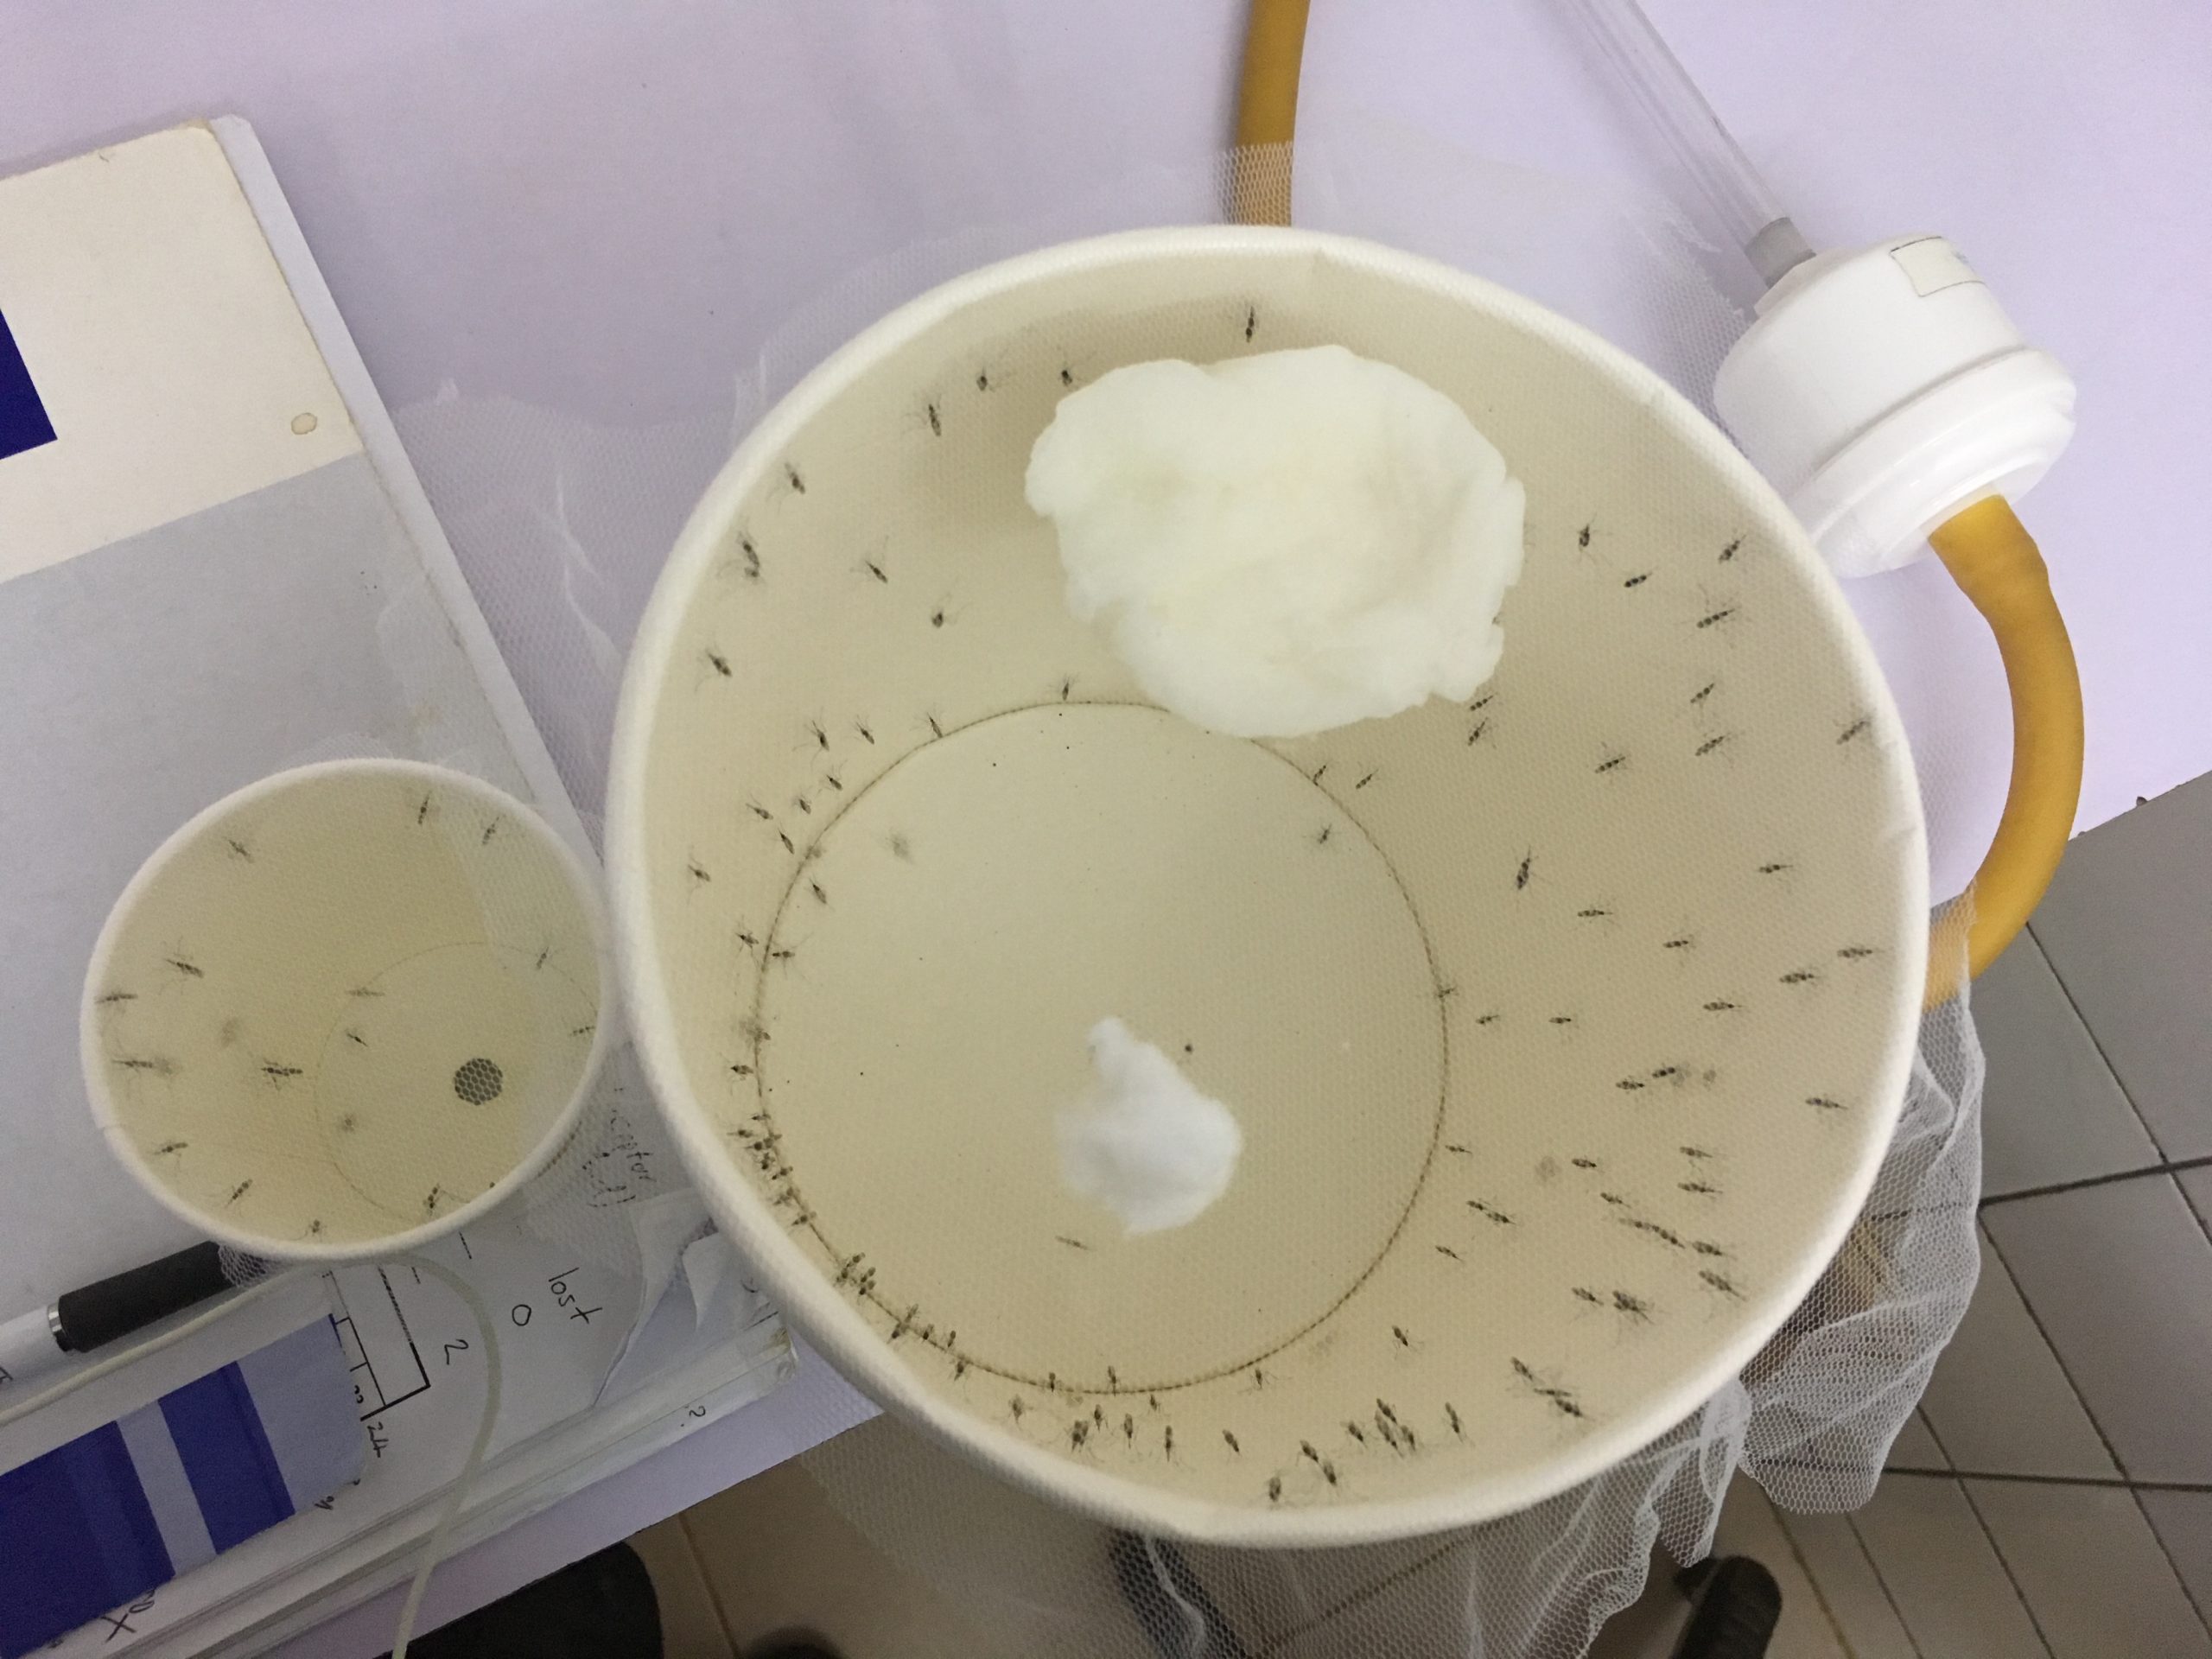 Bird's eye view of numerous mosquitoes inside of paper cup covered with transparent netting with a white cotton ball partially inserted into the netting